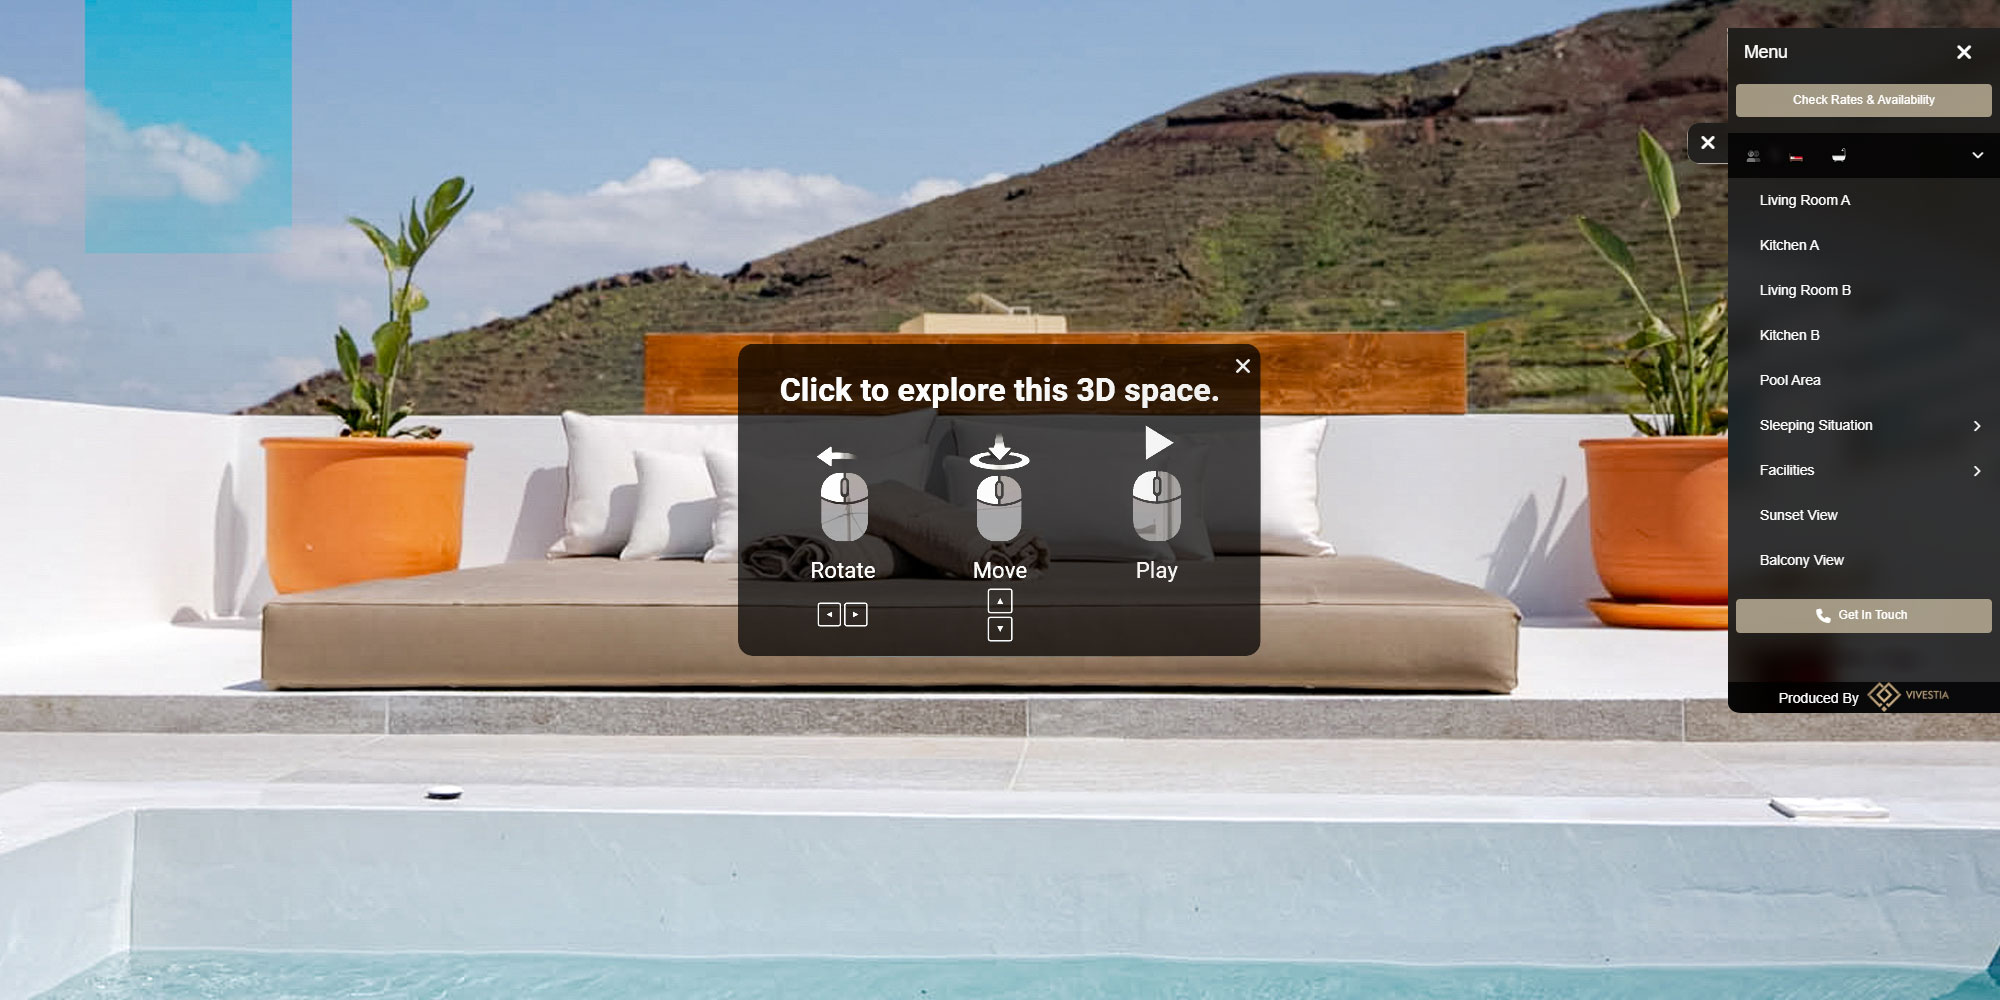 Hospitality in 360 Degrees: Virtual Tours Influence on Hotel Marketing-Vivestia | Risk-Free Villas, Hotels and Cruises in VR